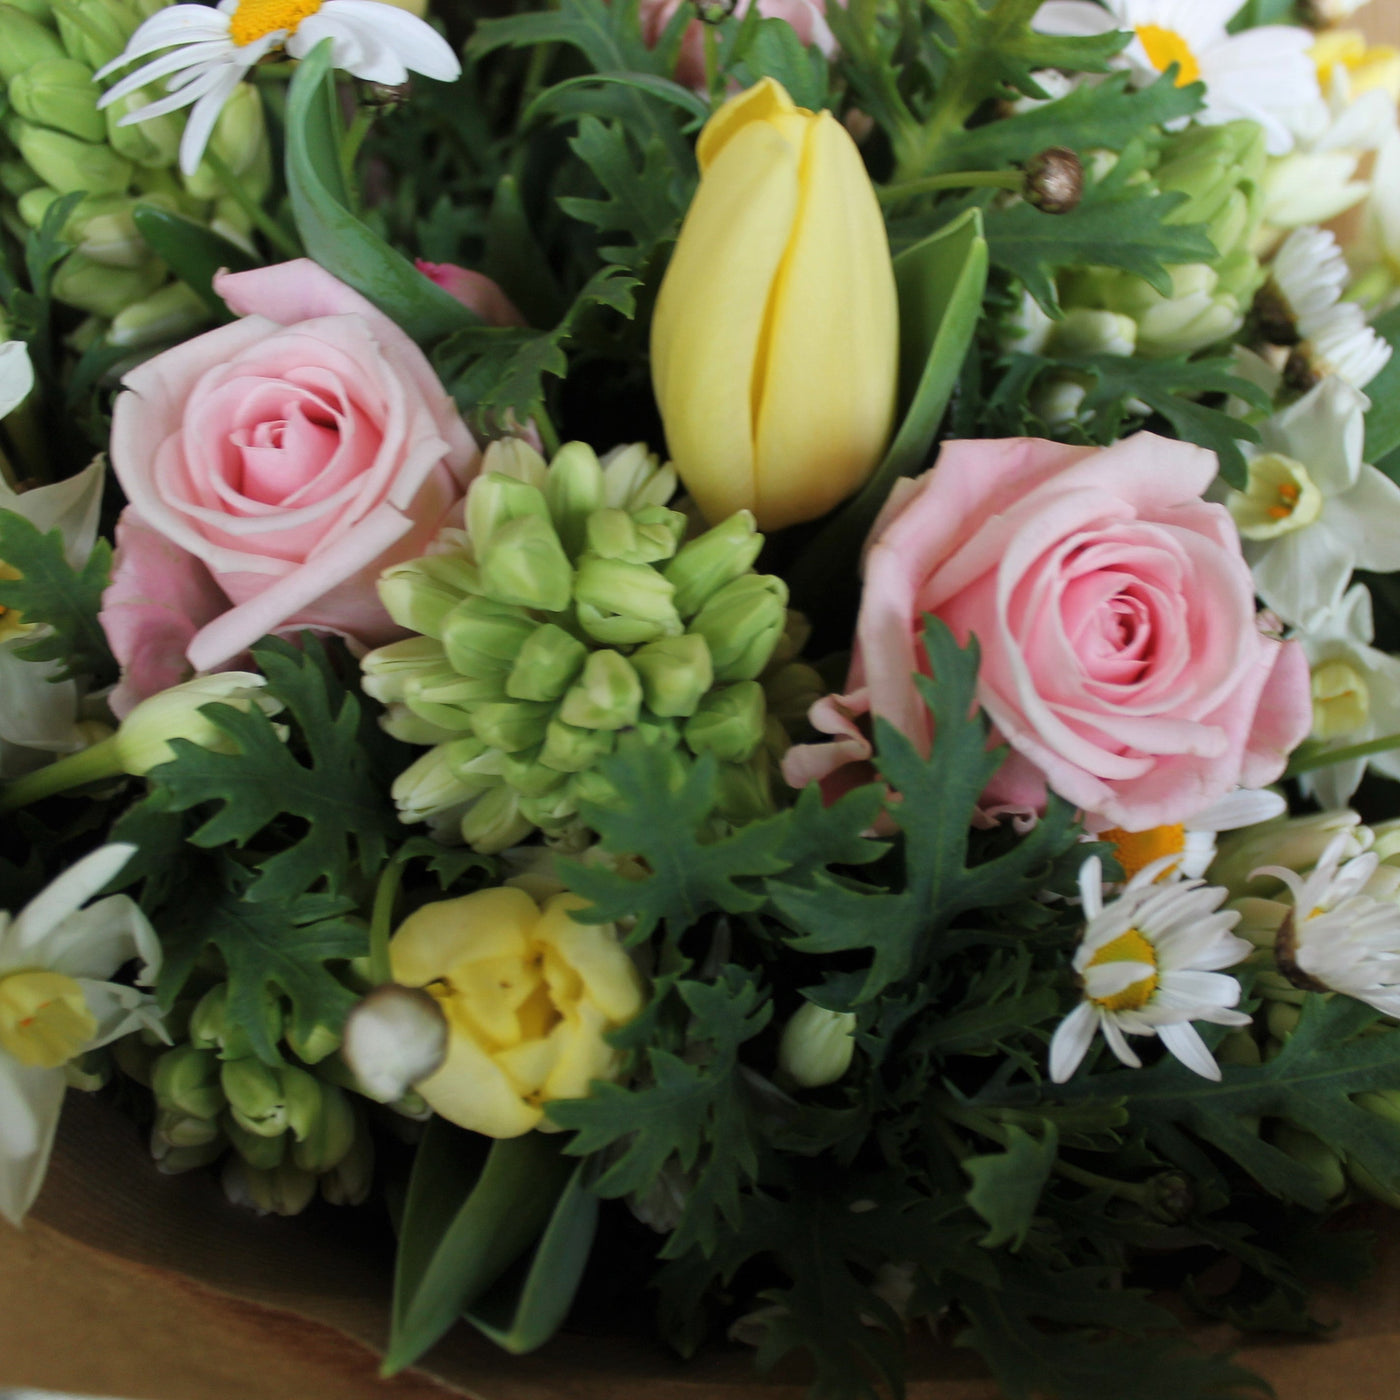 The scented posy